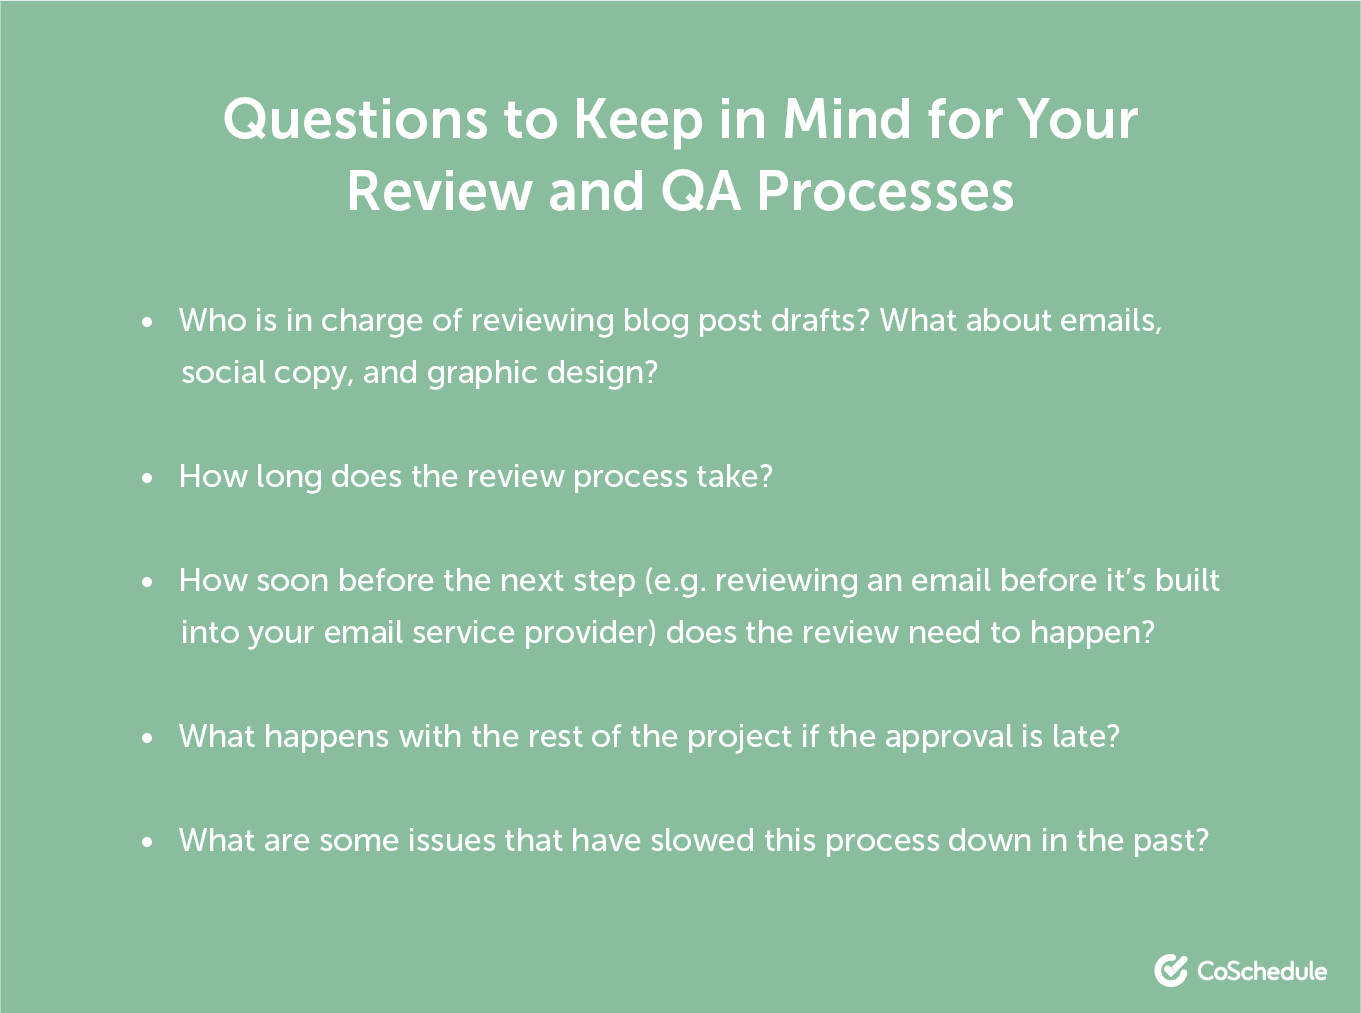 Questions to consider for review and QA processes